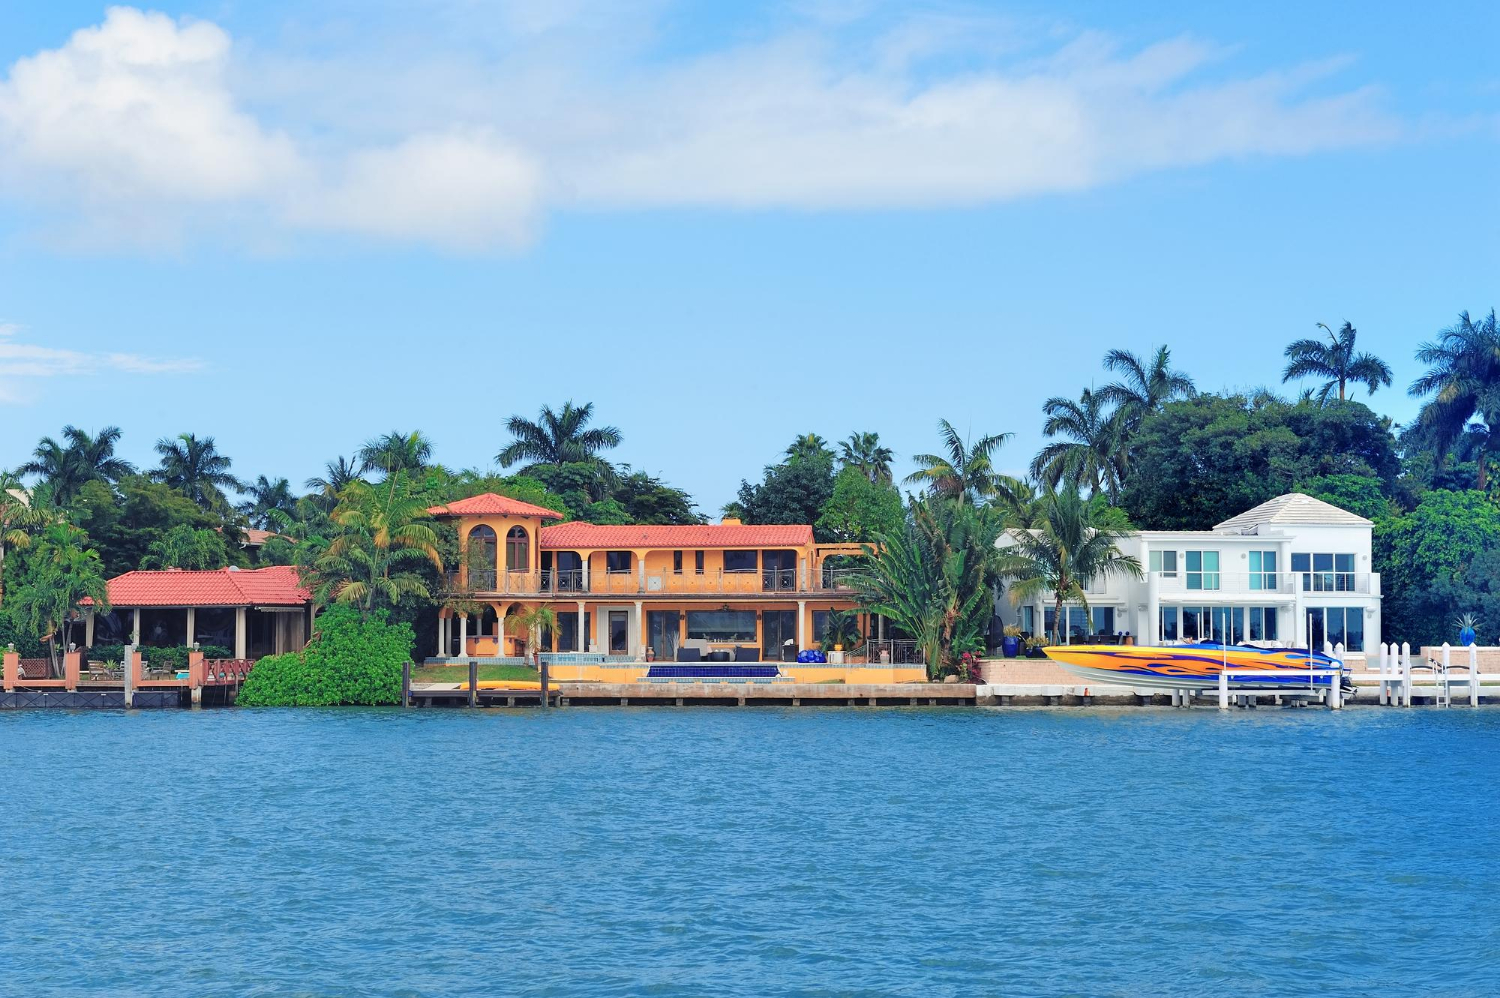 From ‘For Sale’ to ‘SOLD’: The Ultimate Guide for Florida House Buyers and Sellers!